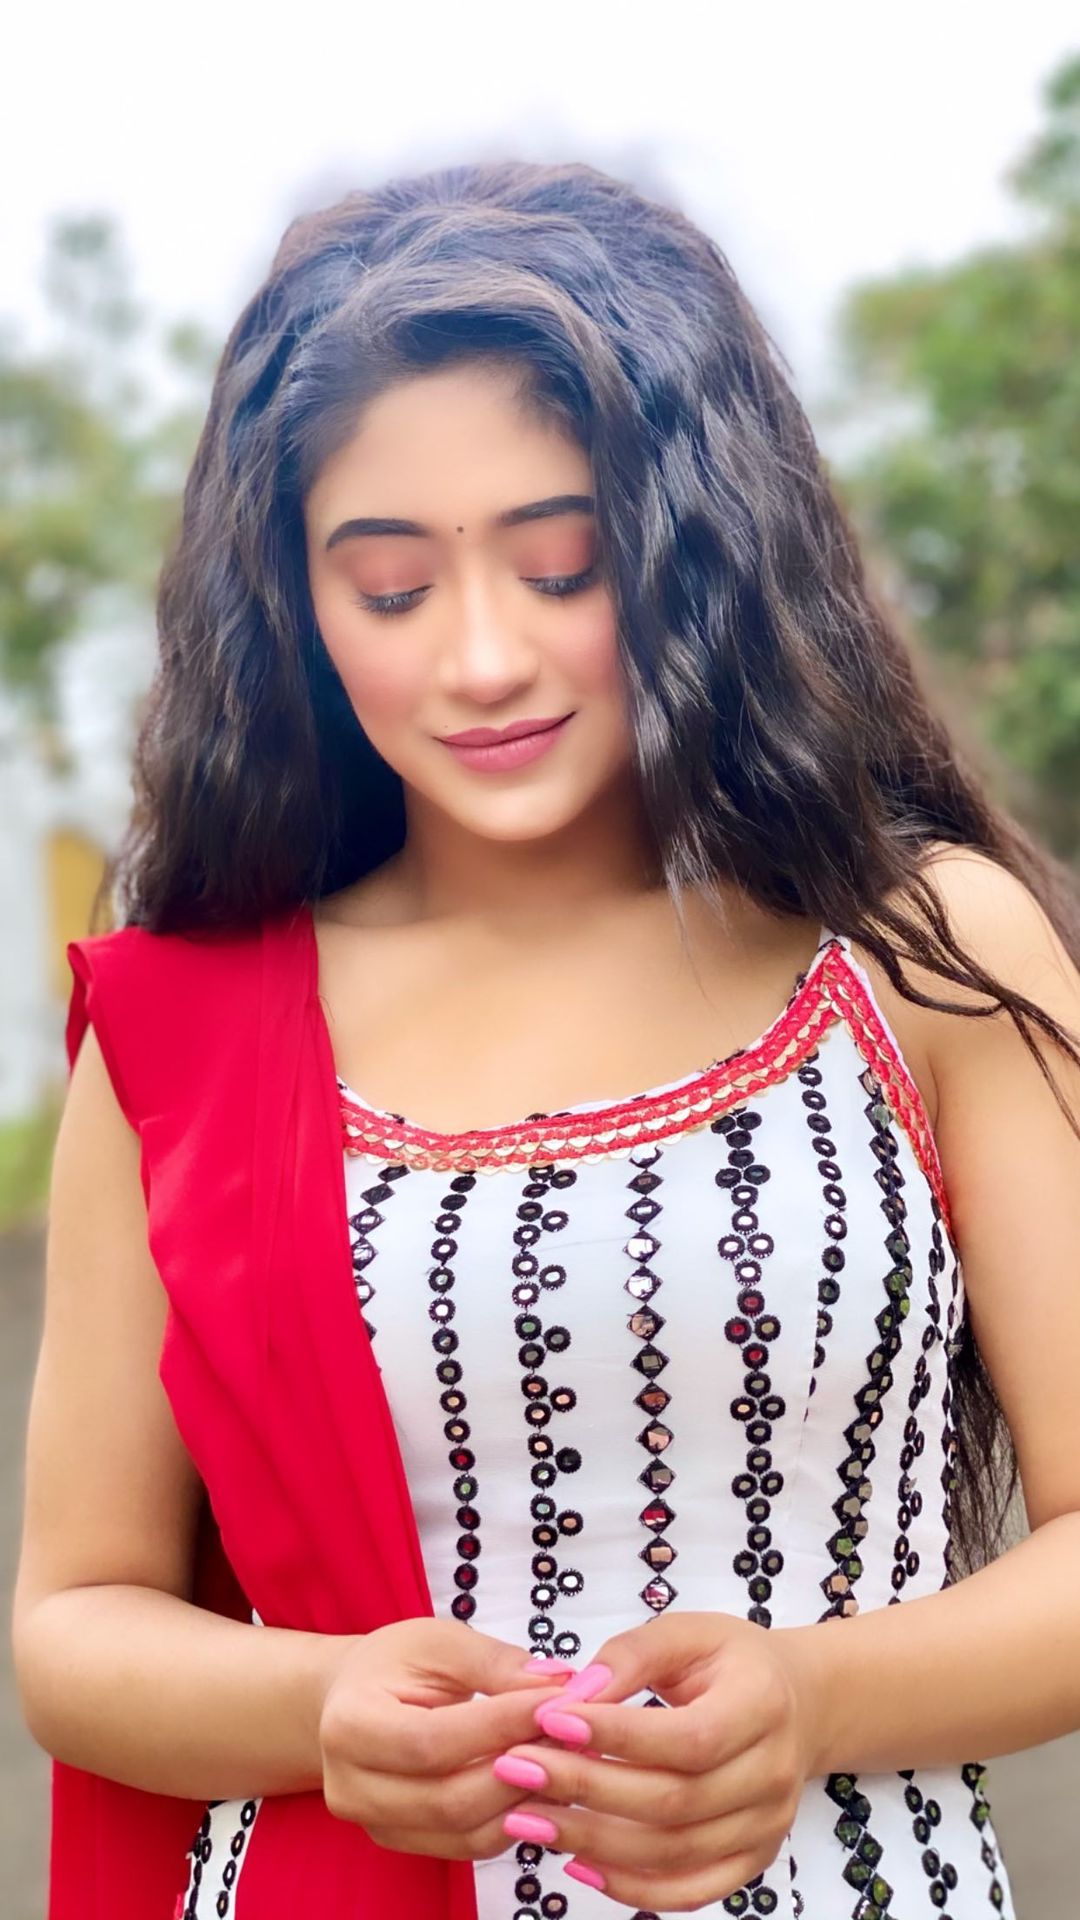 Pretty in red: Shivangi Joshi looks undeniably stunning in latest pictures 1